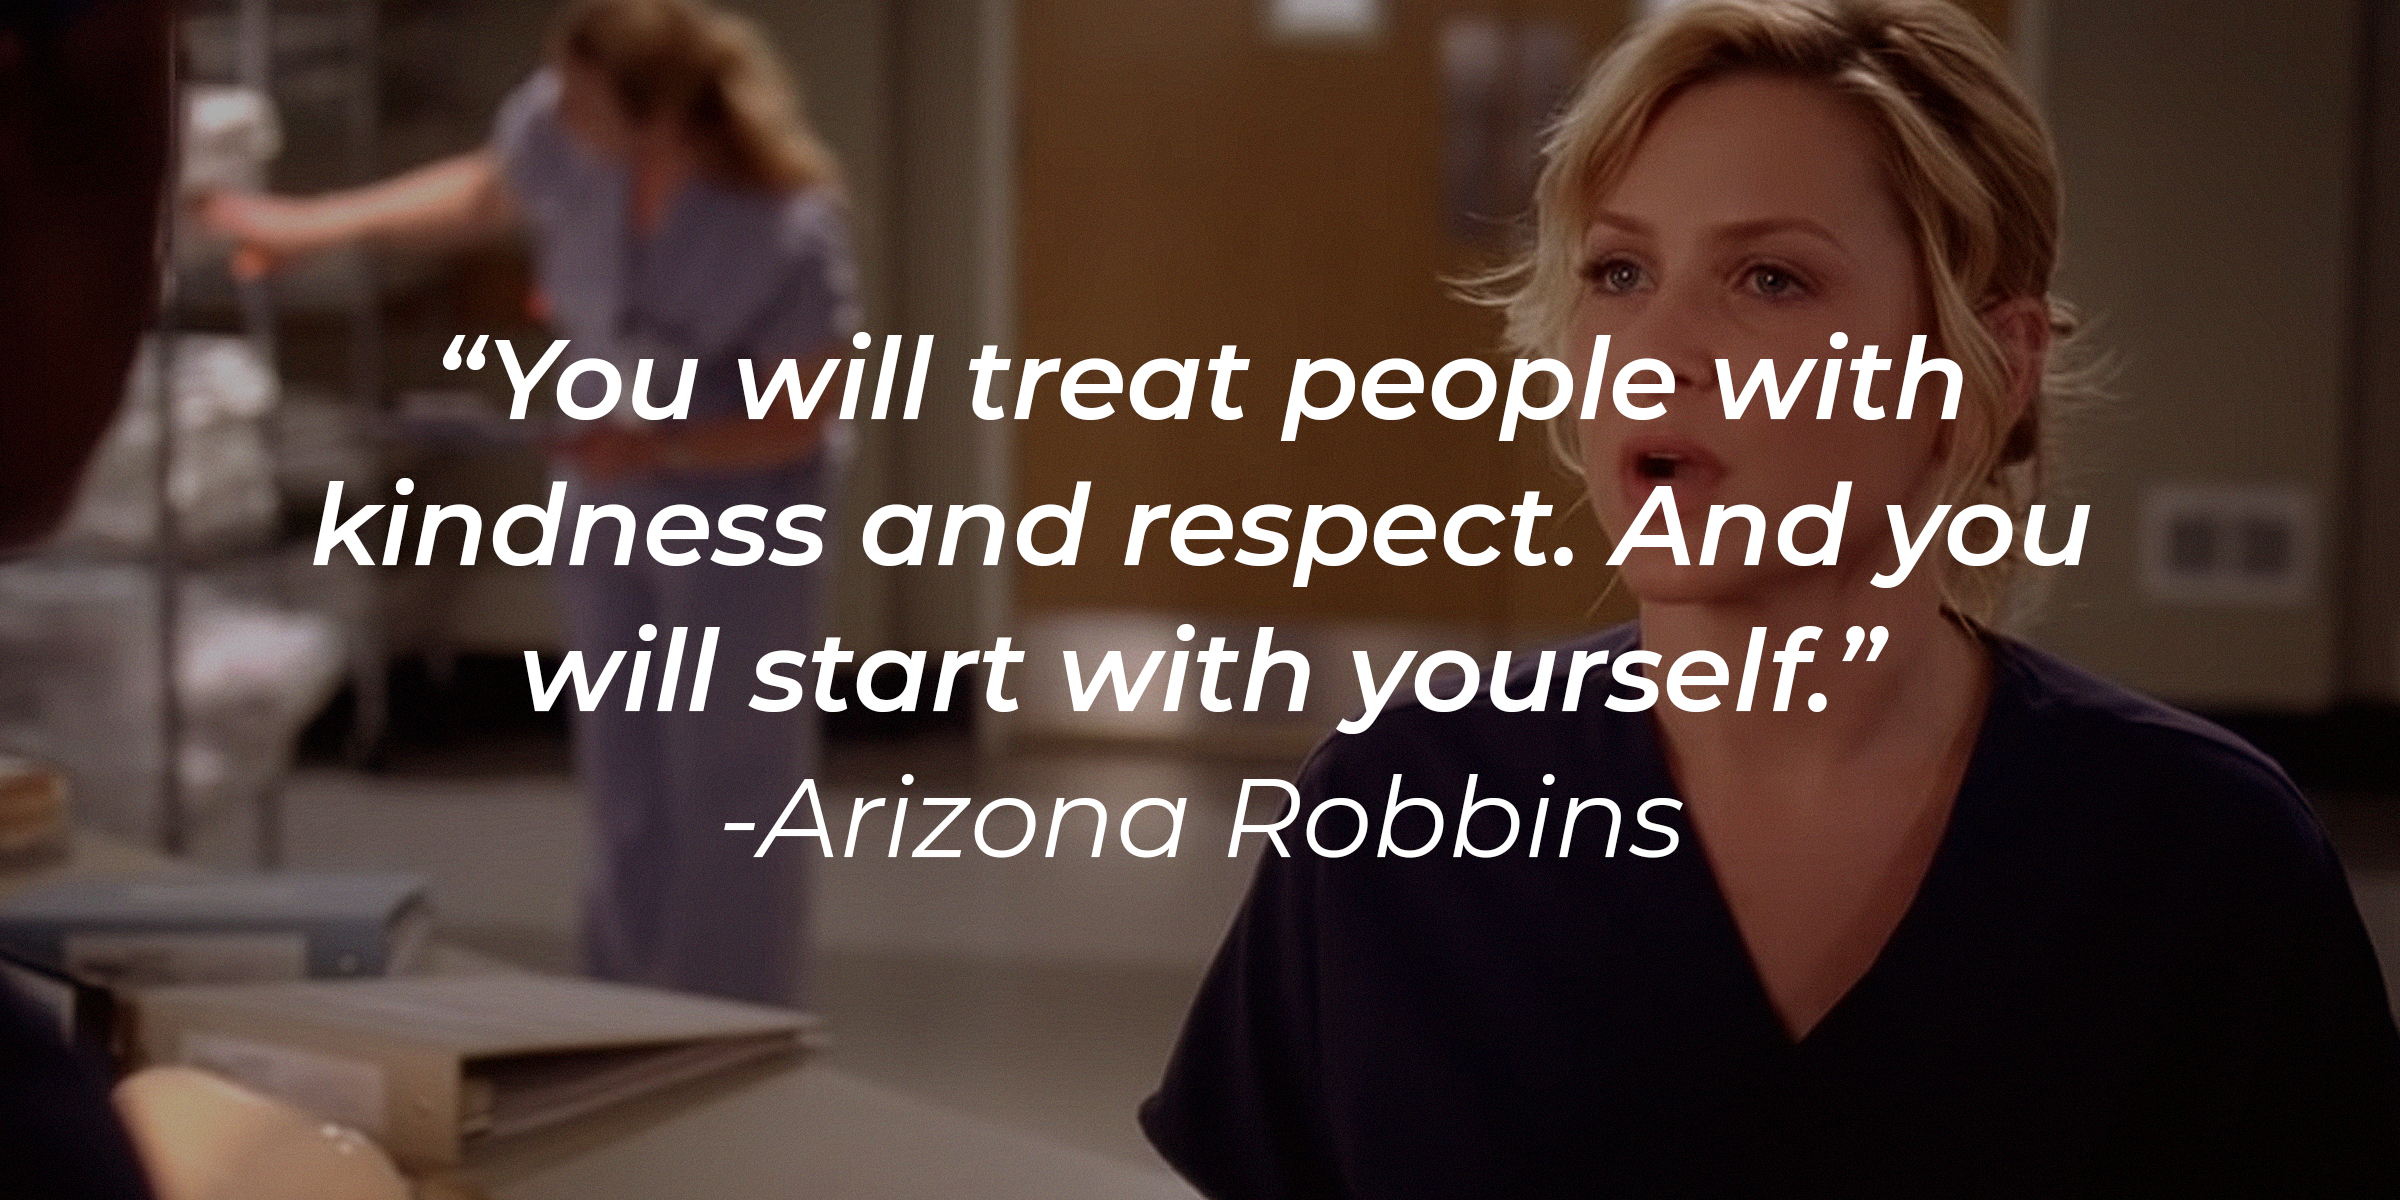 A picture of Arizona Robbins with her quote: "You will treat people with kindness and respect. And you will start with yourself." | Image: AmoDays